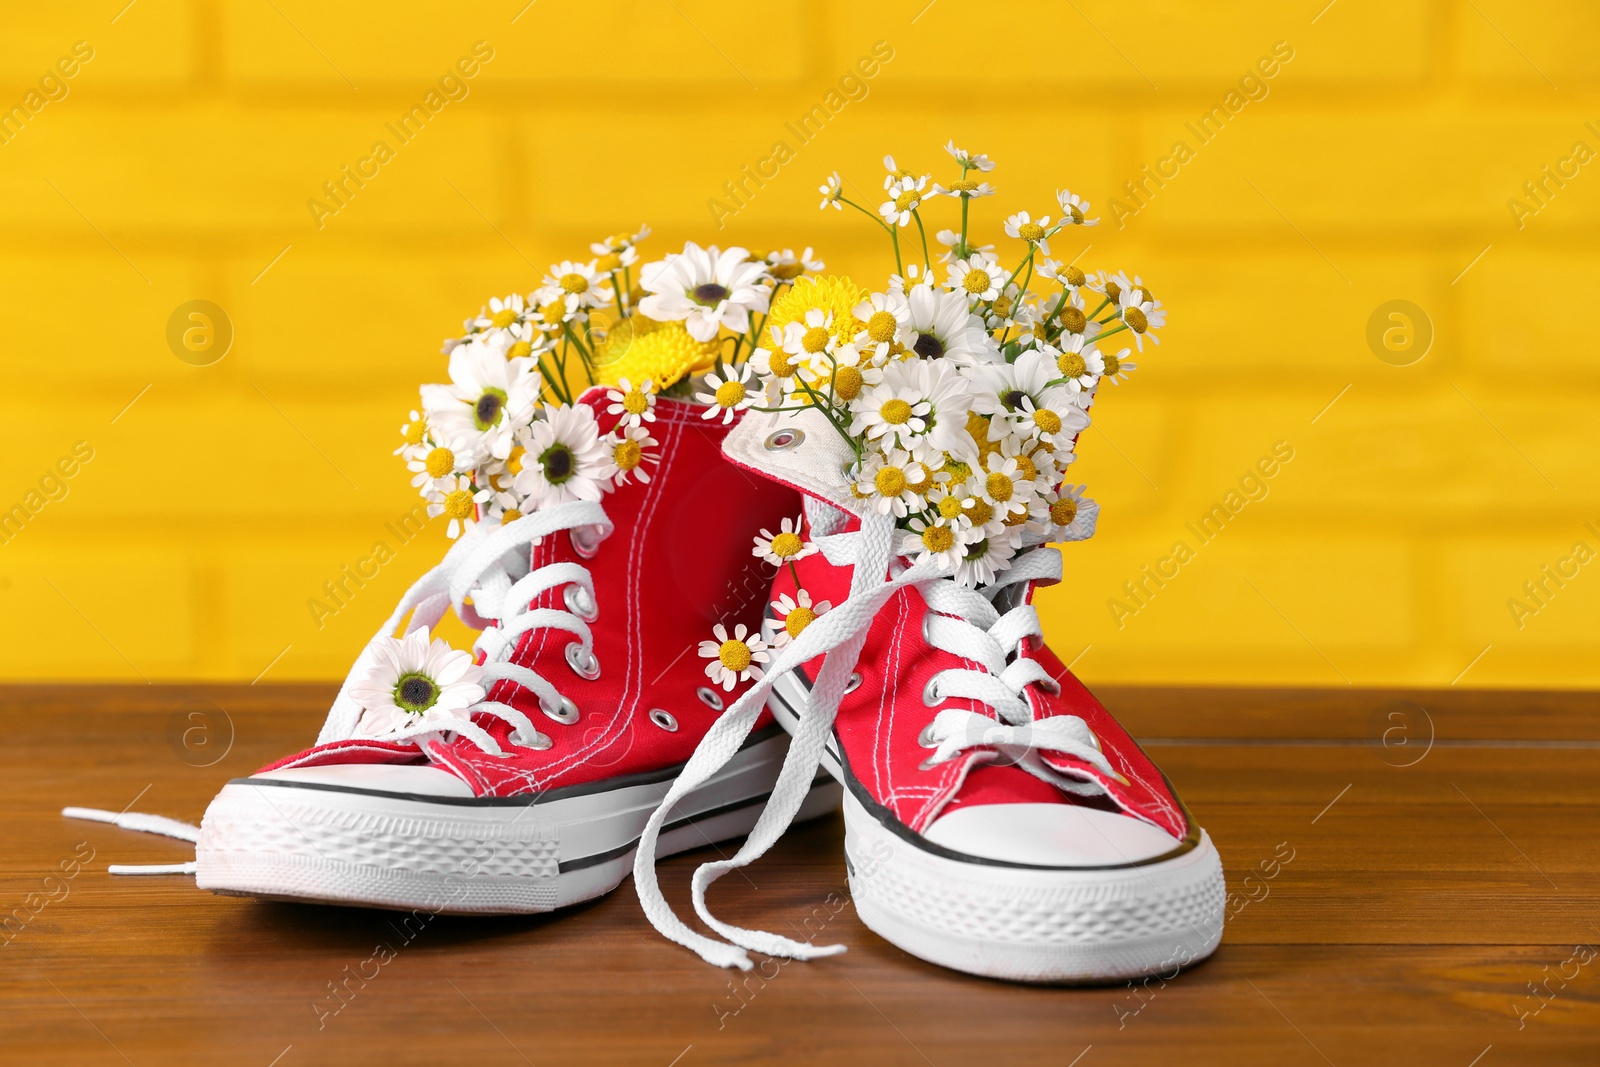 Photo of Shoes with beautiful flowers on wooden surface against yellow brick wall